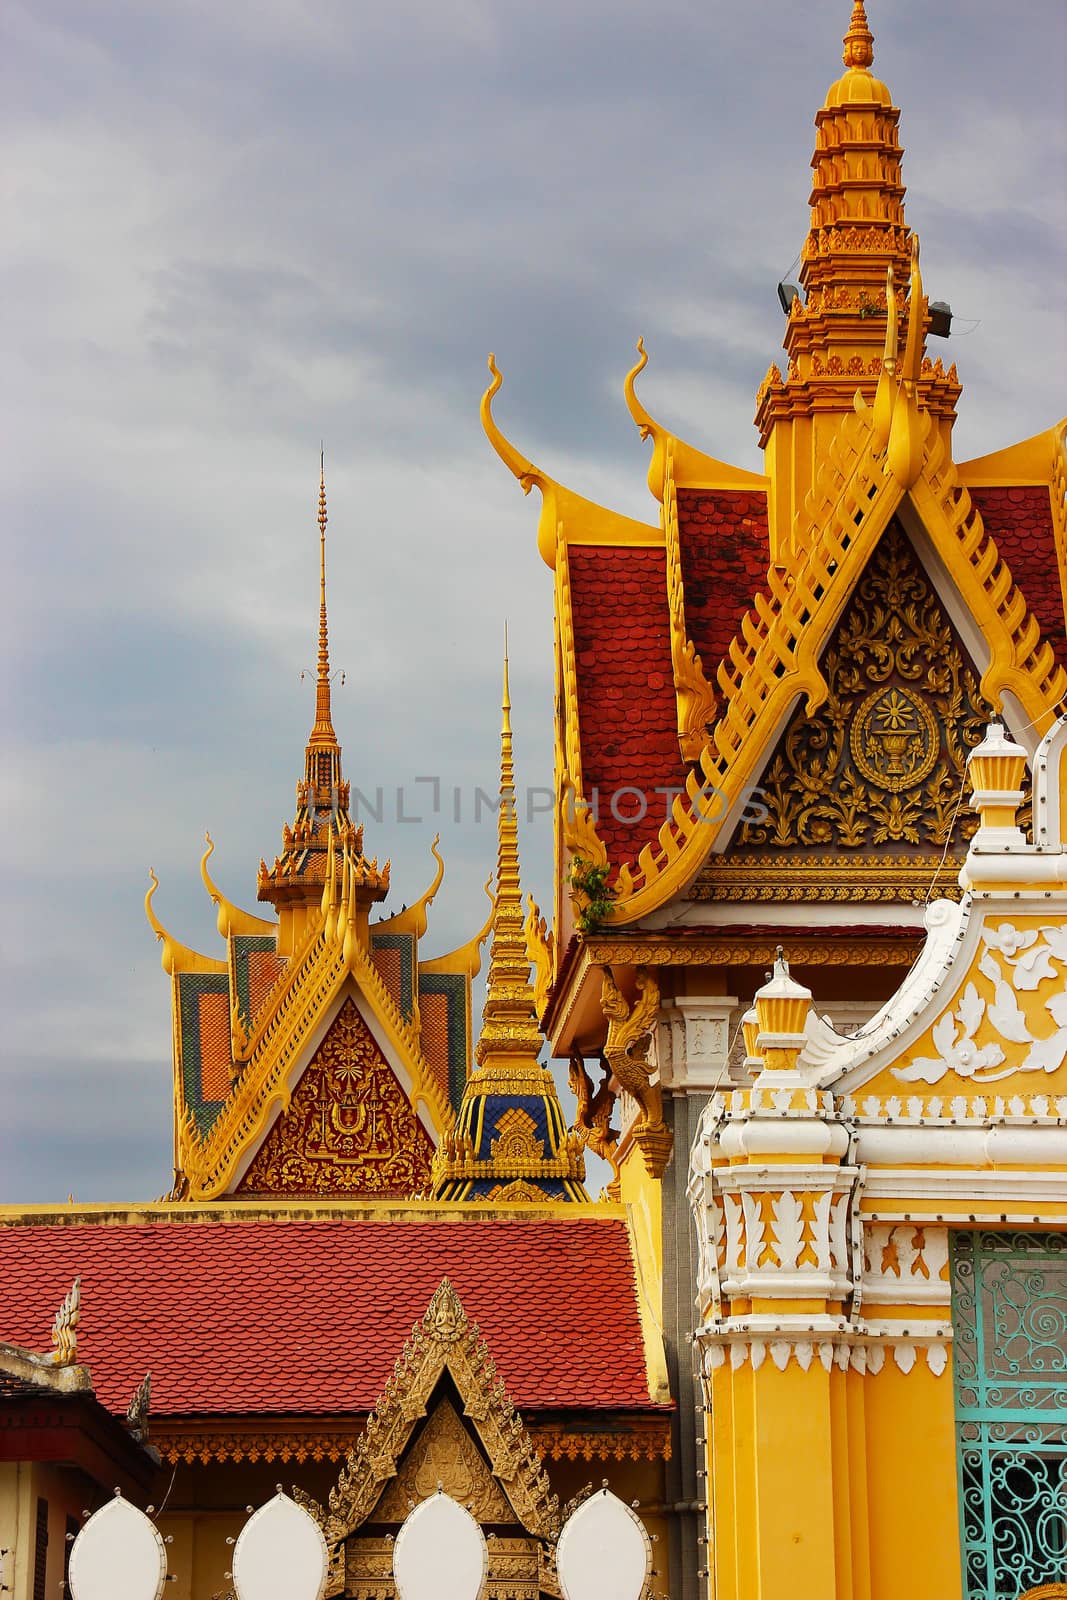 Elements of the Royal Palace complex in Phnom Penh, Cambodia